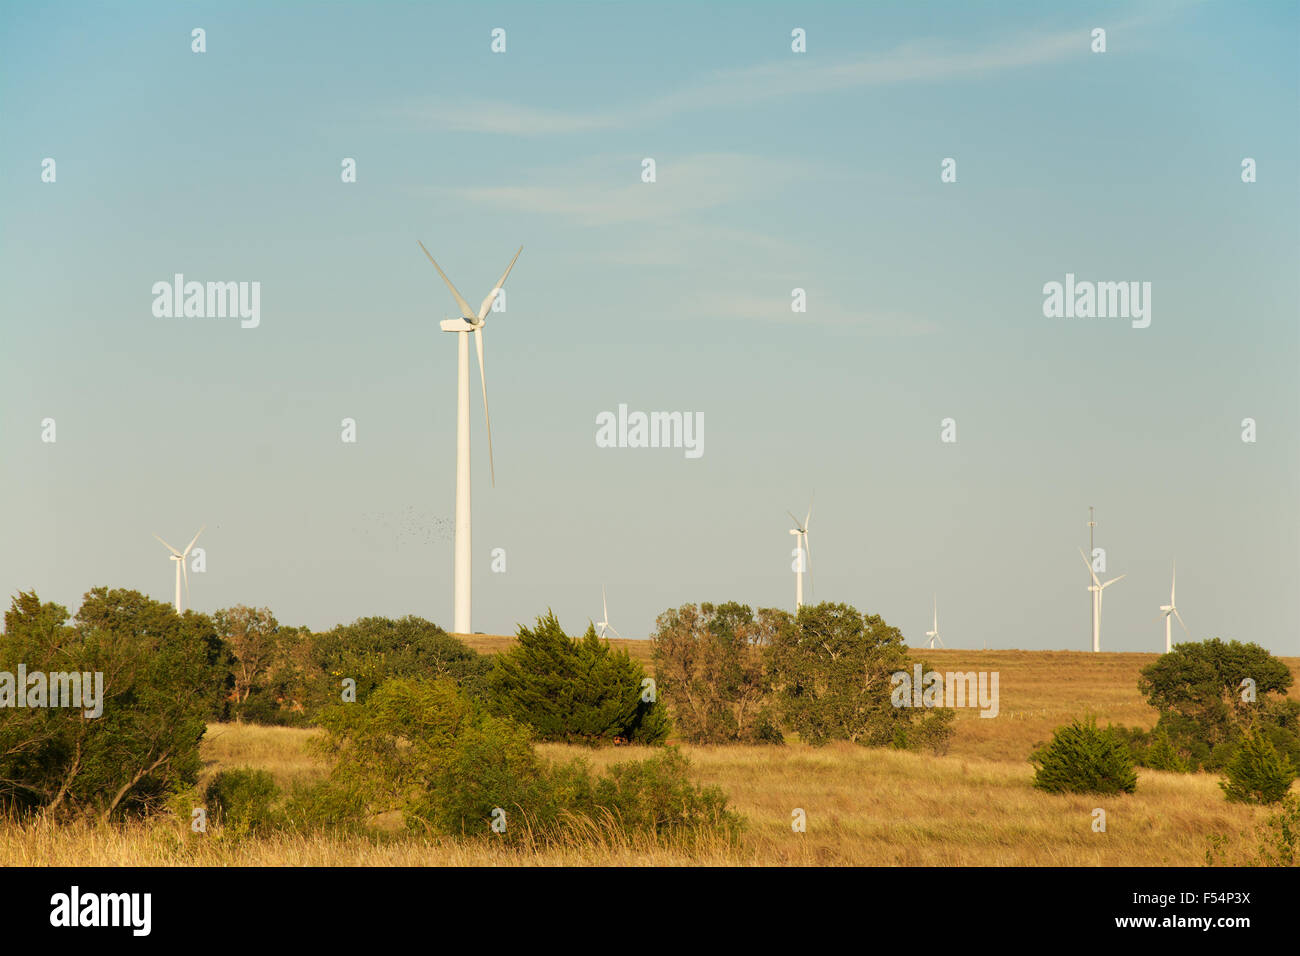 Windmill farm in rural landscape, in late afternoon sun Stock Photo